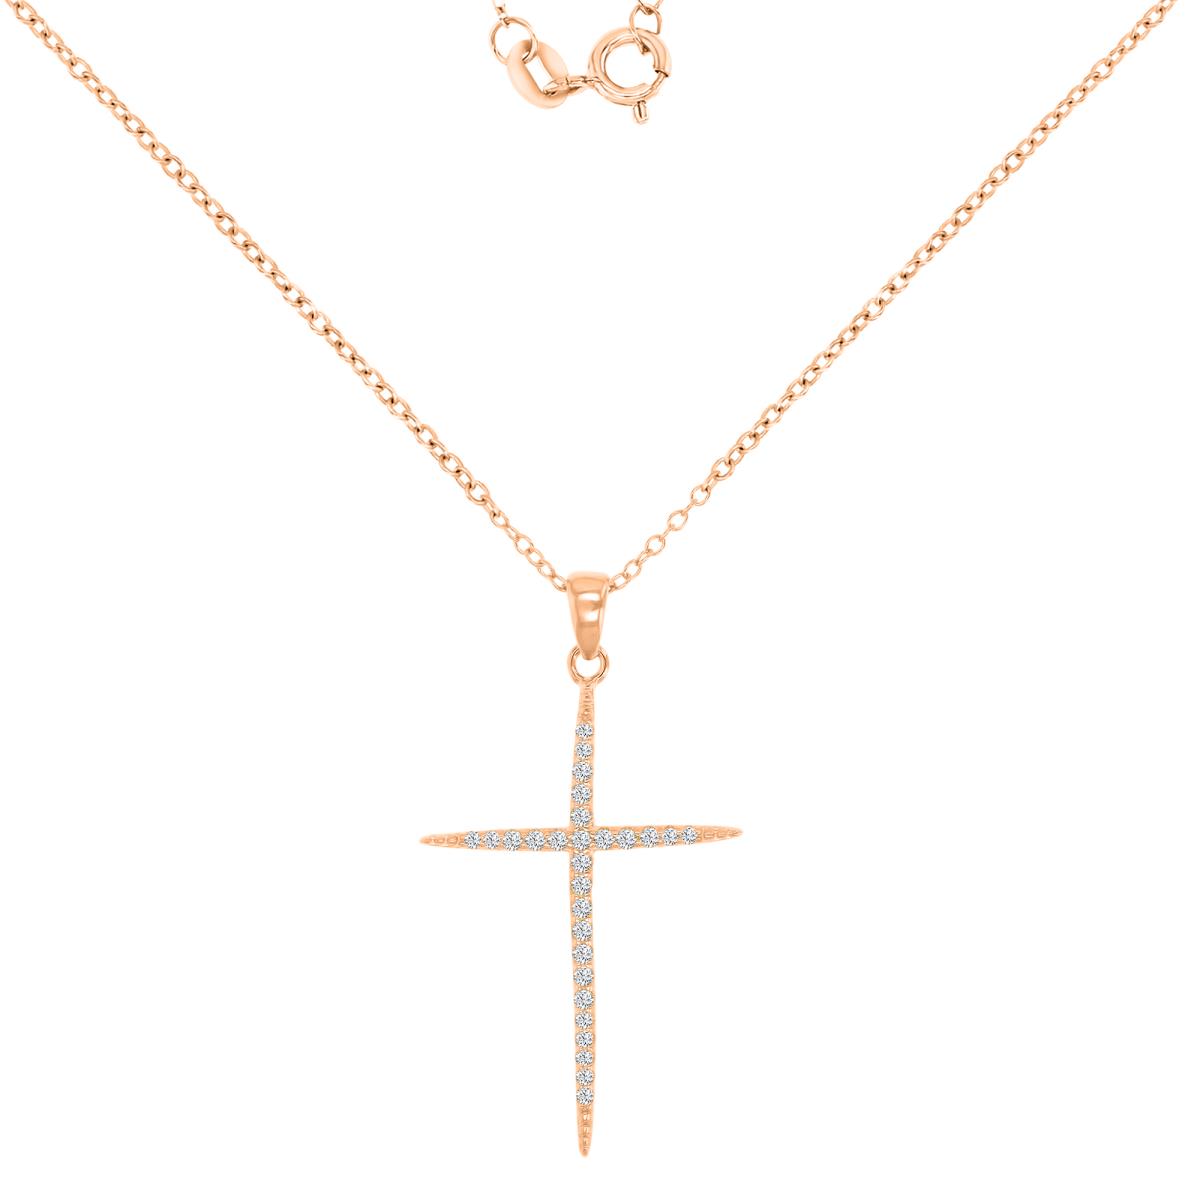 Sterling Silver+1Micron Rose Gold Rnd White CZ Infiniti & Cross Dangling18"Necklace